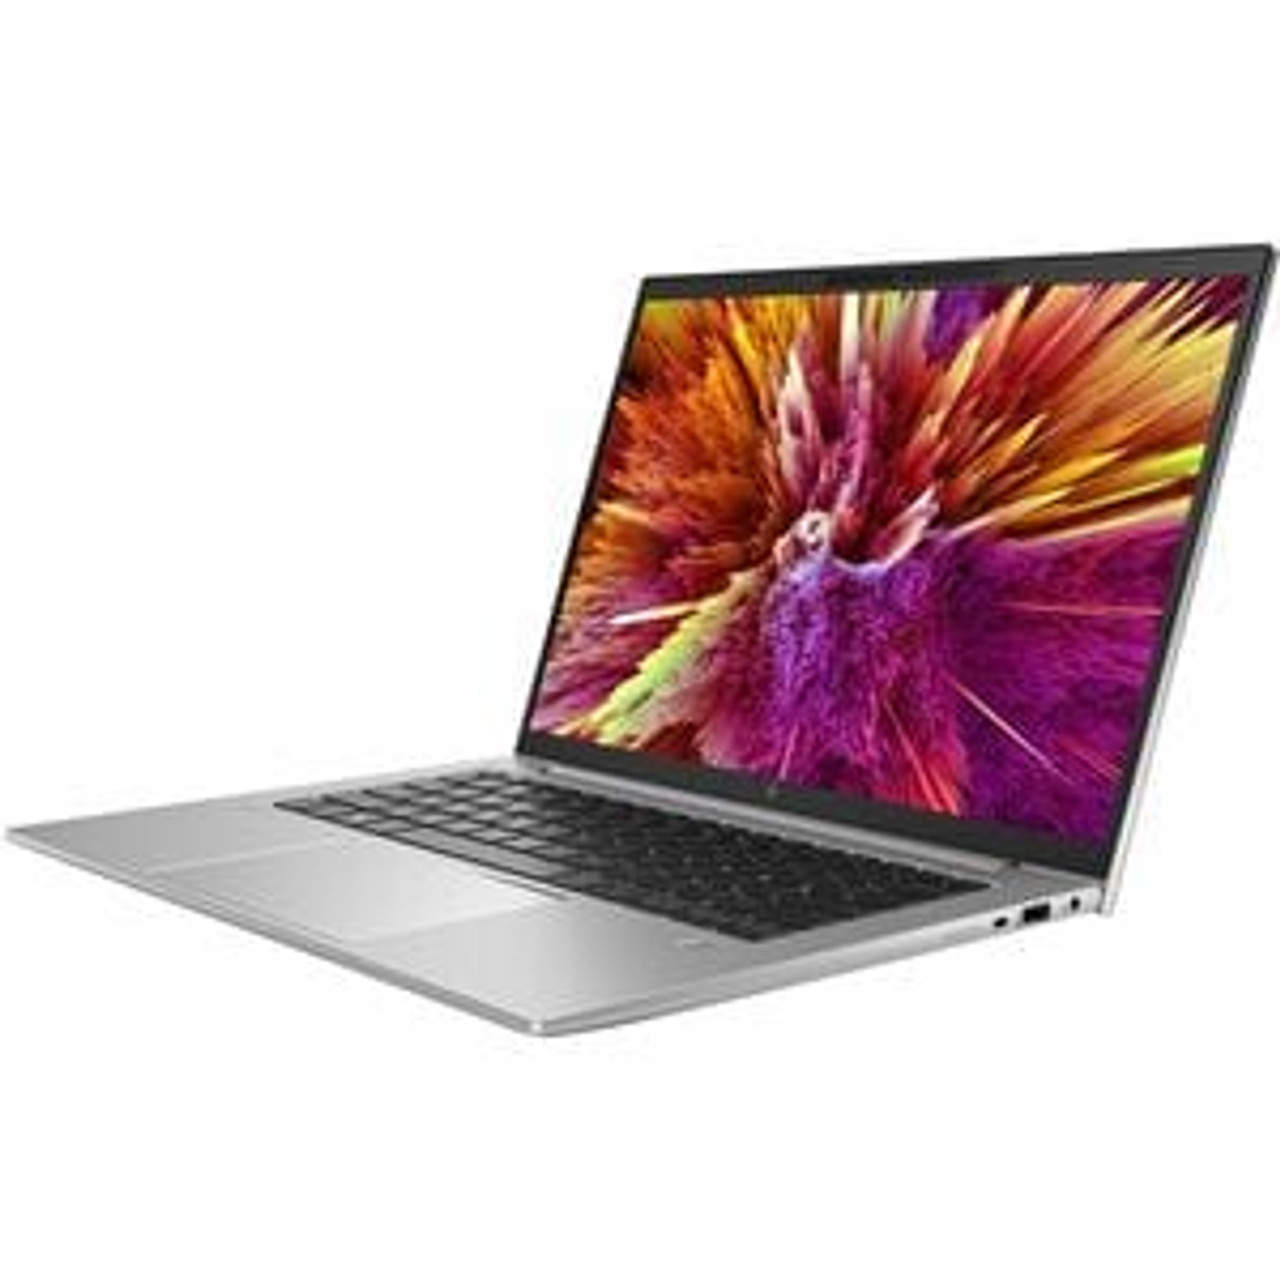 HP ZBook Firefly G10 14" Mobile Workstation - Intel Core i5 13th Gen i5-1350P - 32 GB - 512 GB SSD - Intel Chip - In-plane Switching (IPS) Technology - IEEE 802.11ax Wireless LAN Standard - 8Q406UP#ABA